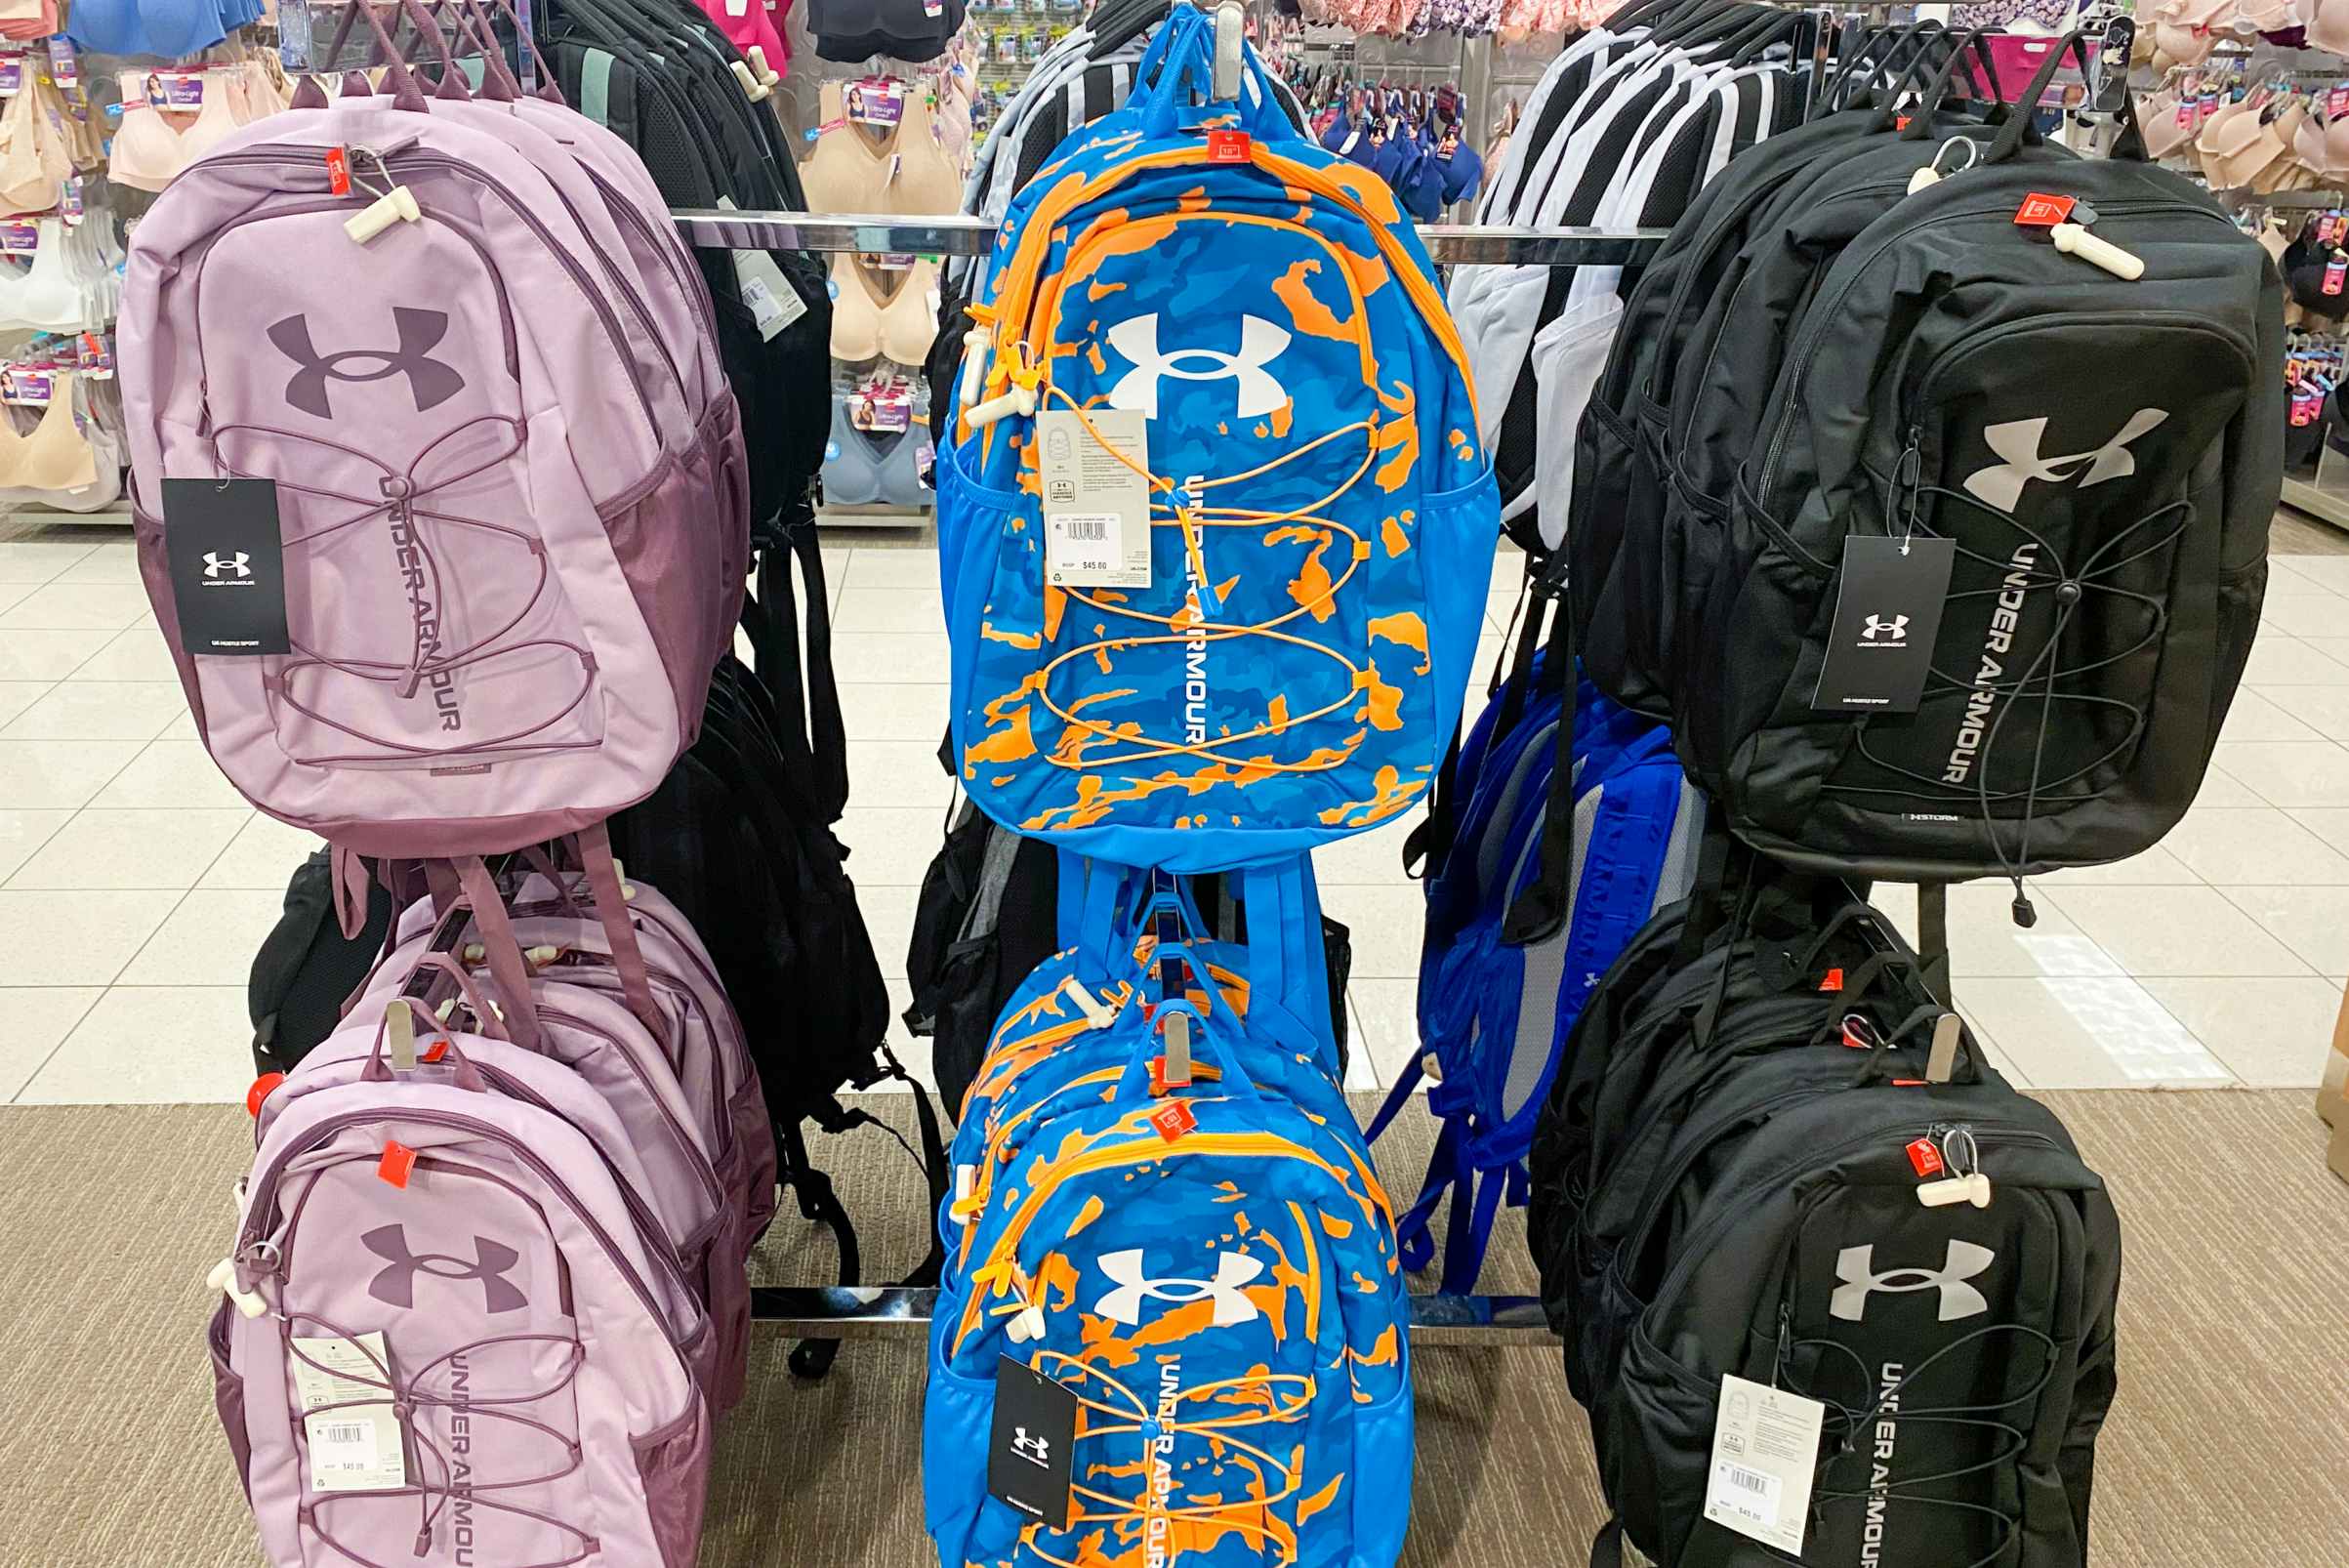 underamour backpack section in kohls